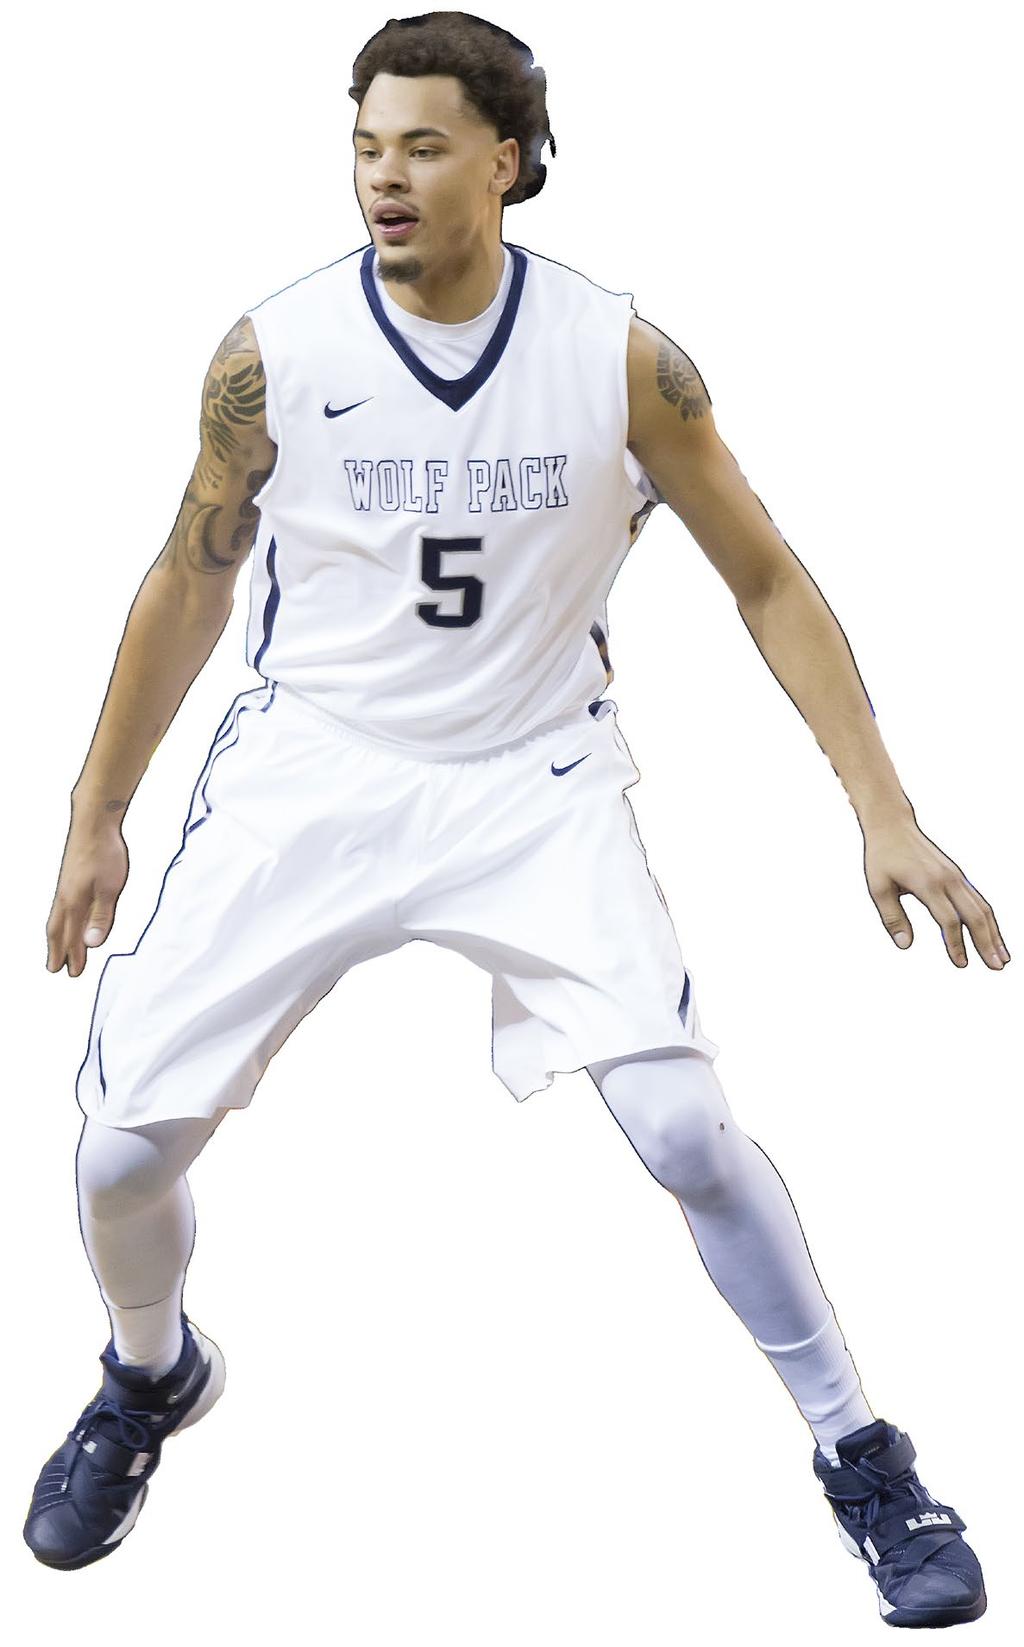 kaileb rodriguez #5 NEVADA: Back for his second season at Nevada... Provides the team with frontcourt depth and size... Played in 30 games his sophomore year and earned nine starts.